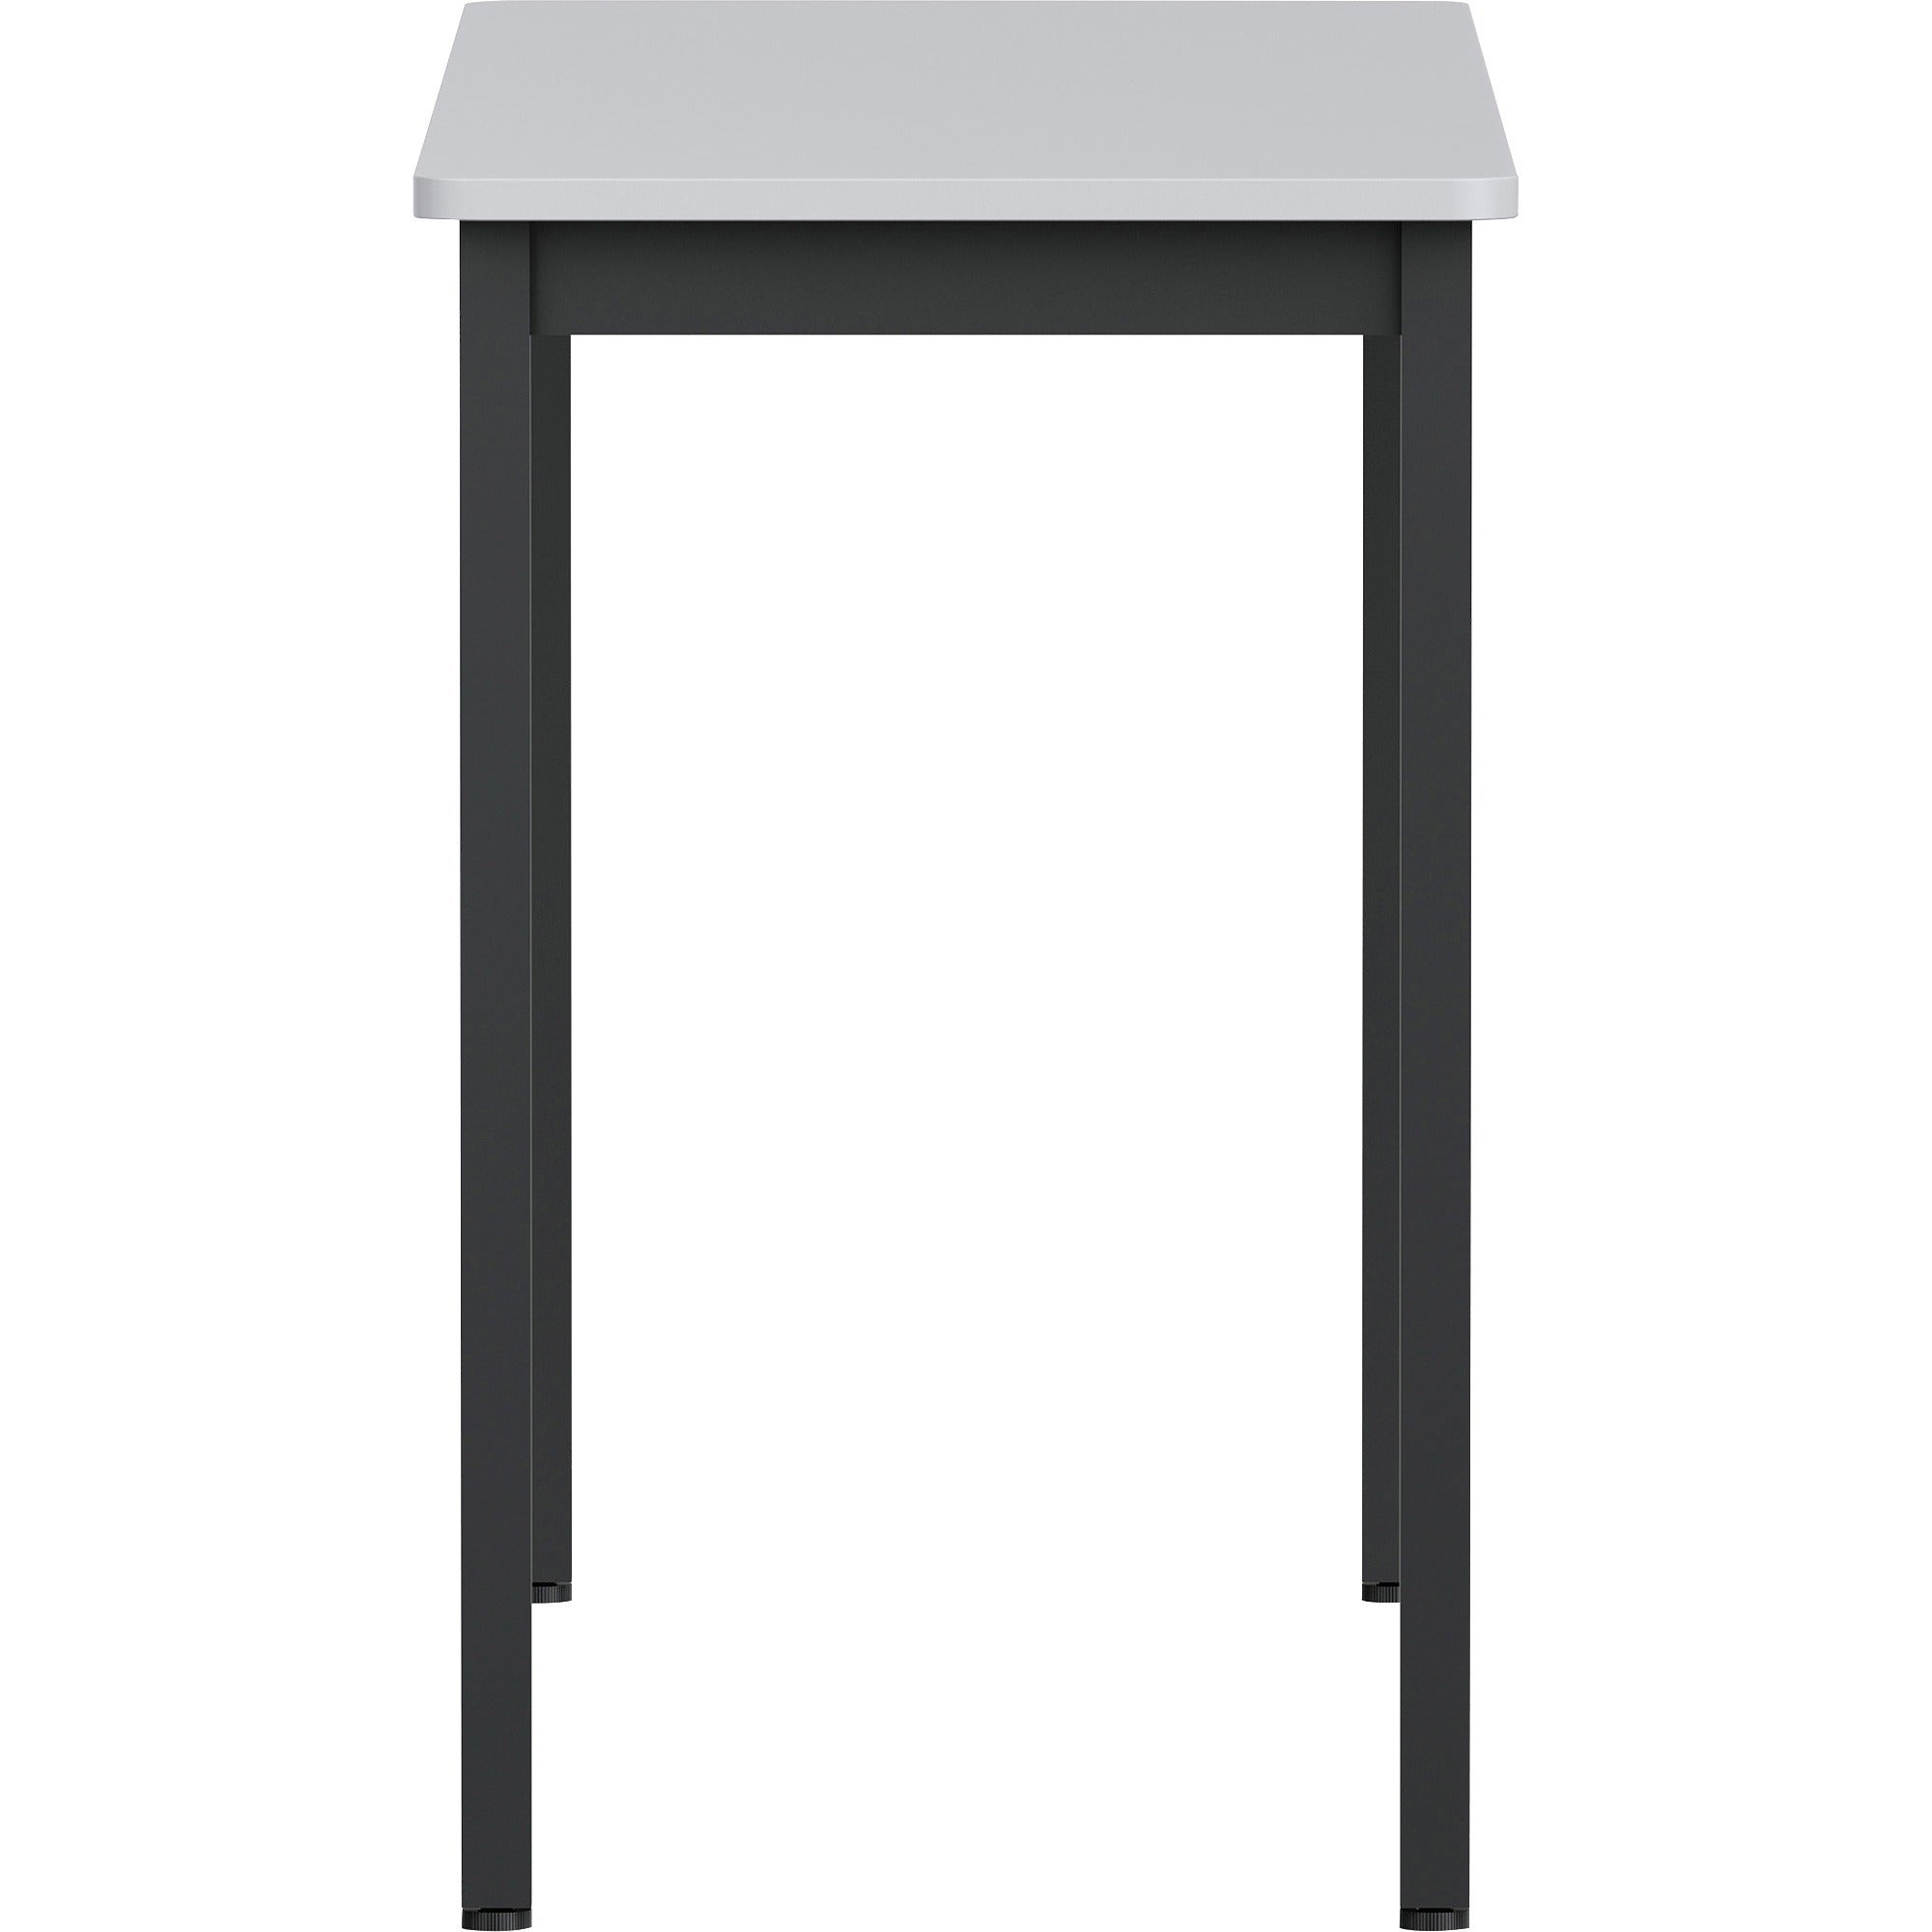 lorell-utility-table-for-table-topgray-rectangle-laminated-top-powder-coated-black-base-500-lb-capacity-x-30-table-top-width-x-1813-table-top-depth-30-height-assembly-required-melamine-top-material-1-each_llr60752 - 4